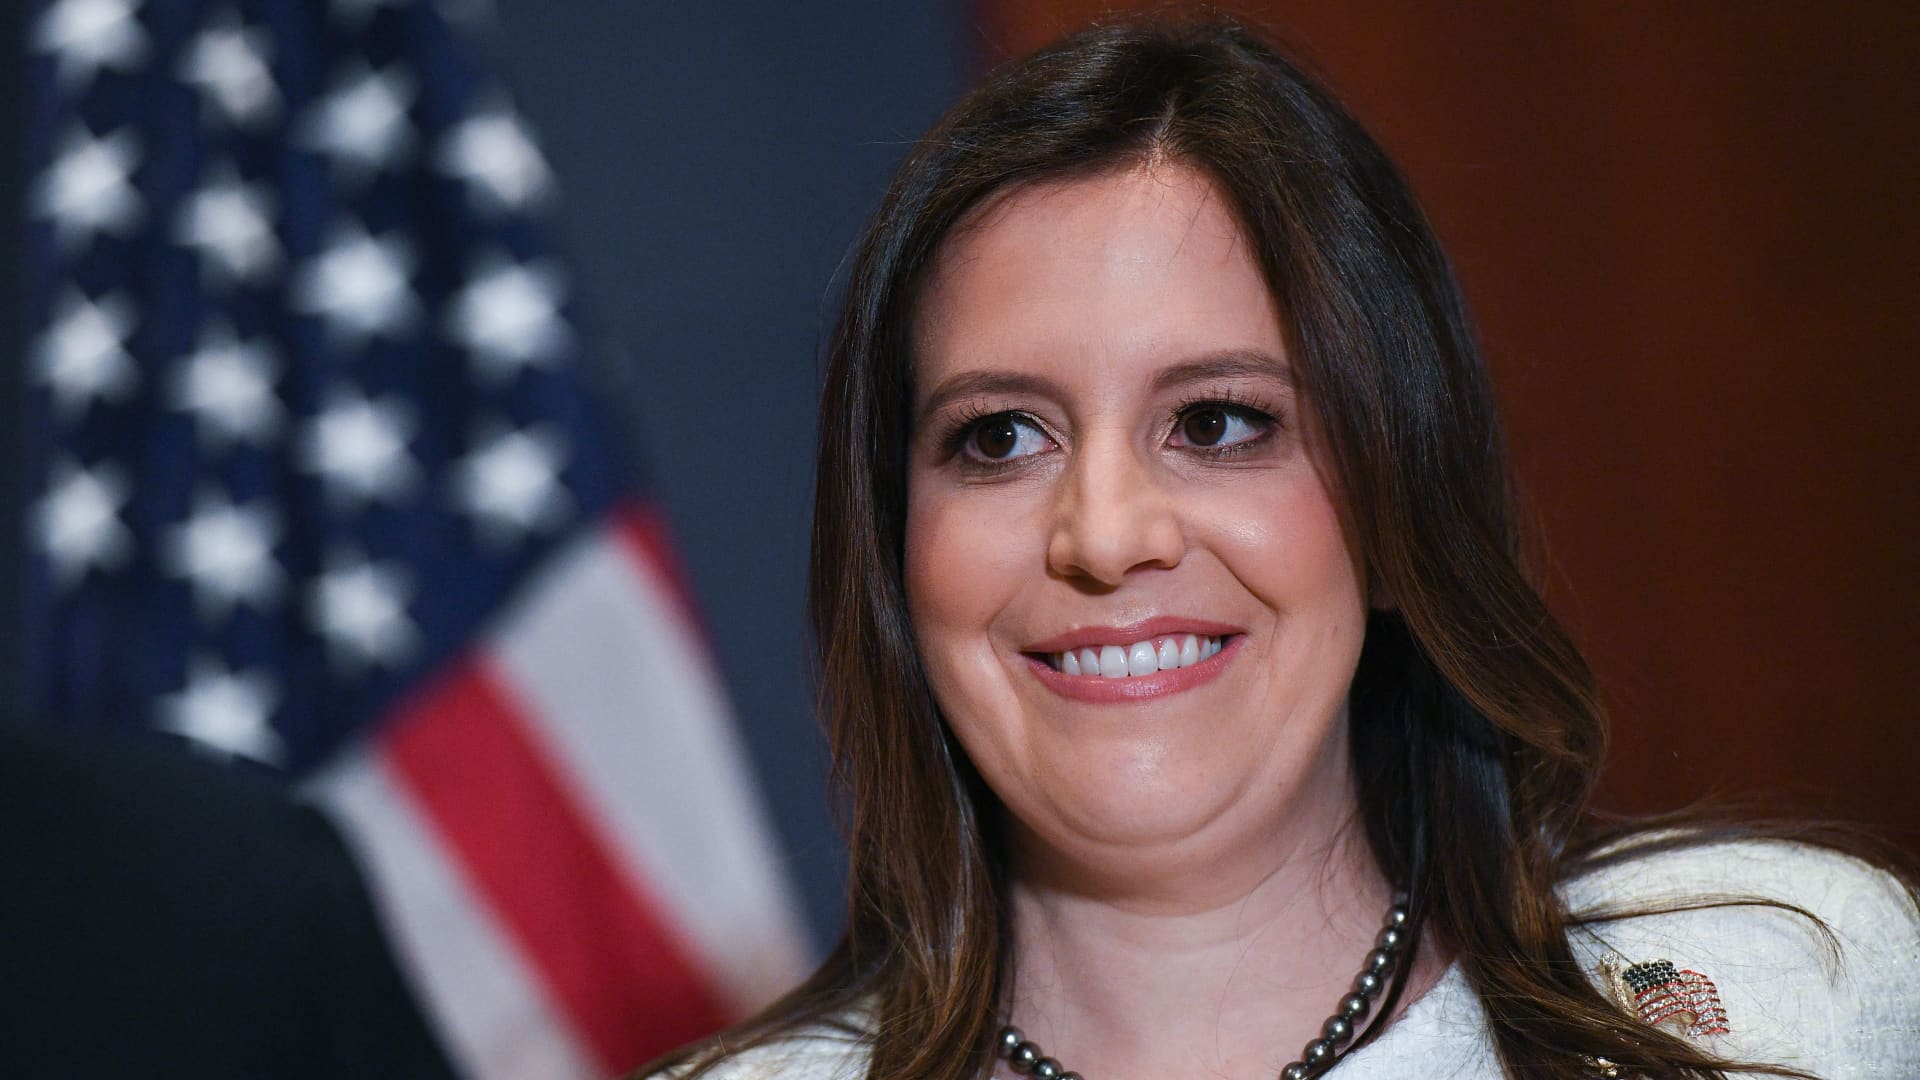 Representative Elise Stefanik (R-NY) smiles after House Republicans voted for her as their conference chairperson at the US Capitol in Washington, DC on May 14, 2021.